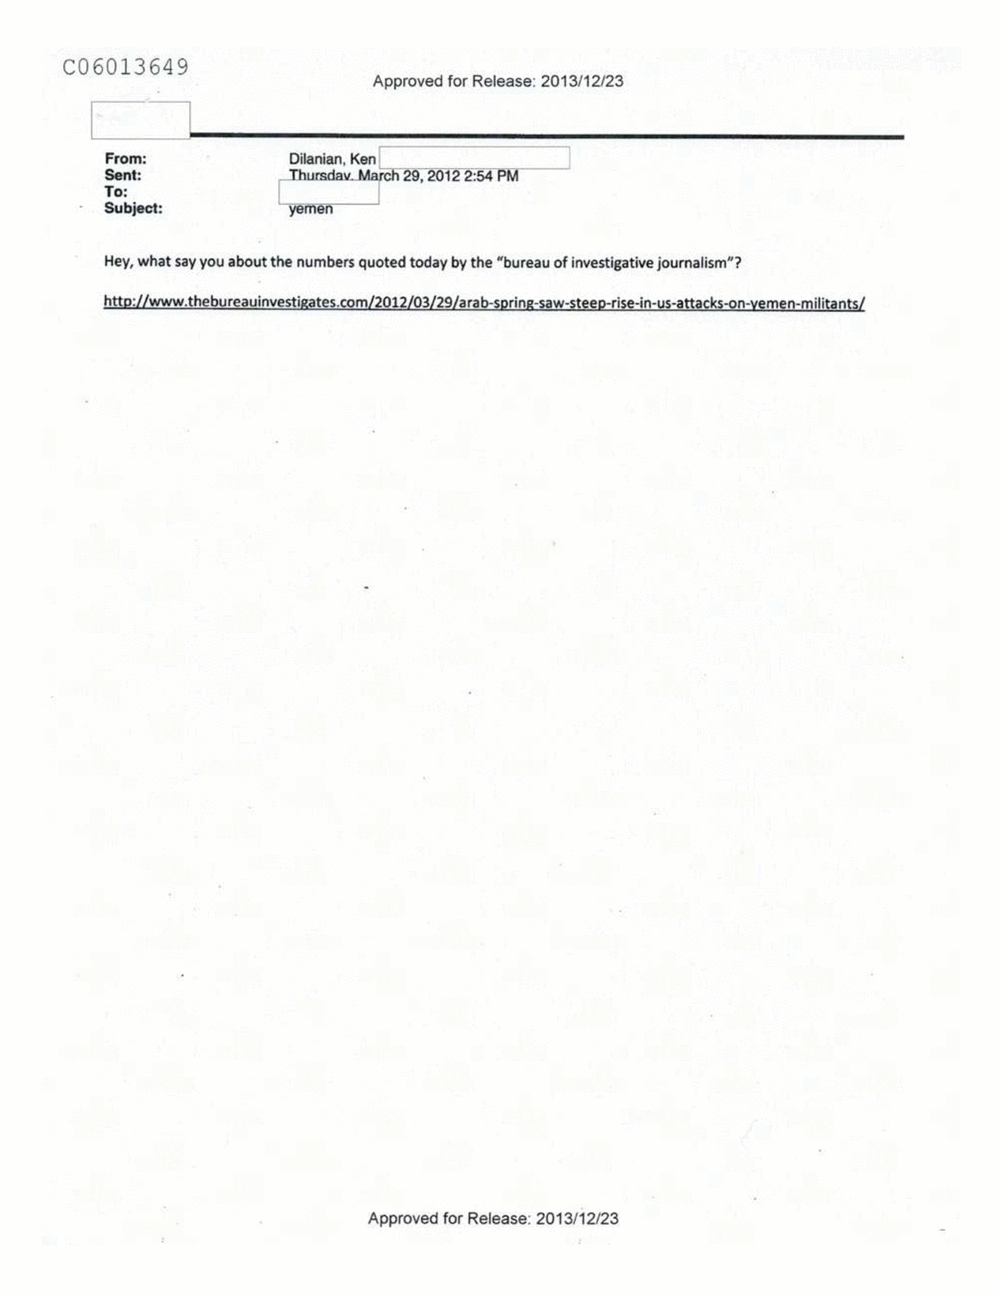 Page 498 from Email Correspondence Between Reporters and CIA Flacks